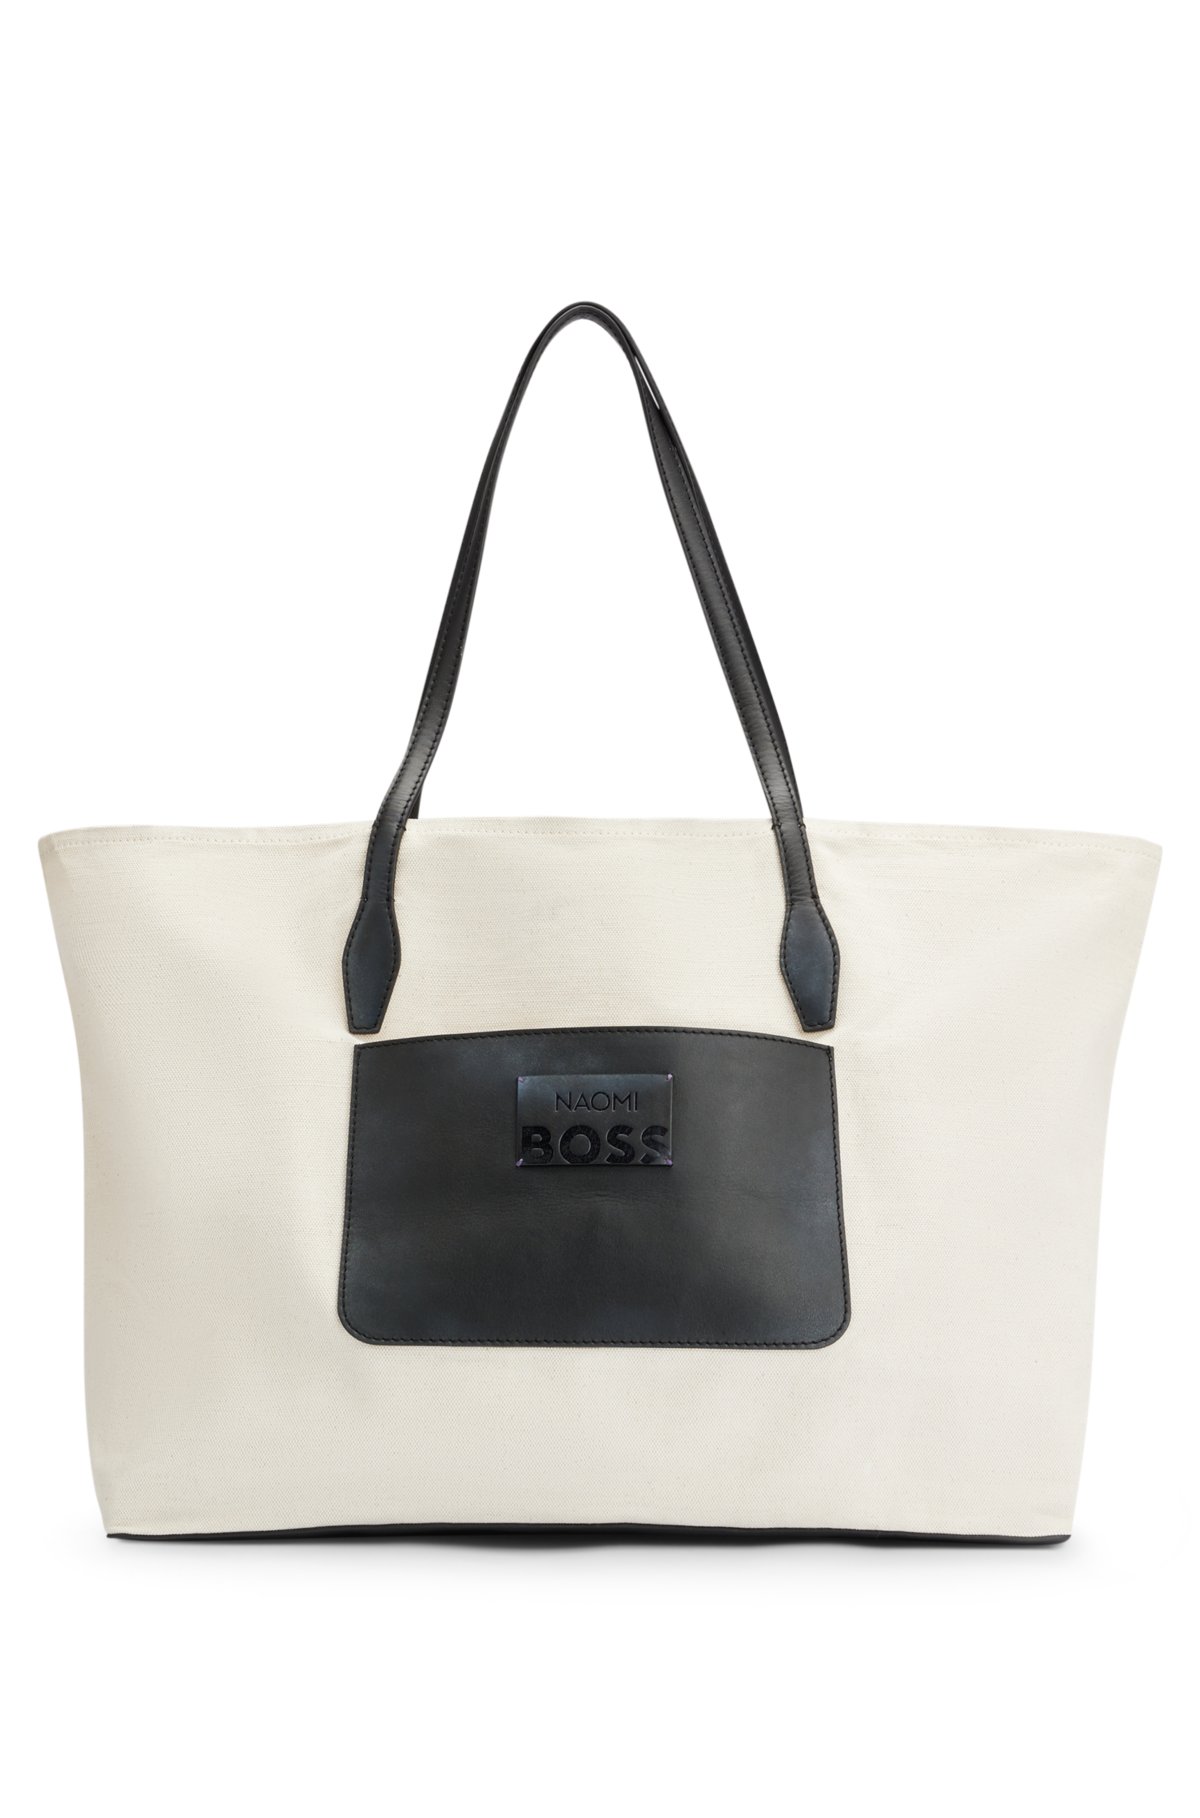 NAOMI x BOSS leather-trimmed shopper bag with detachable pouch, Natural